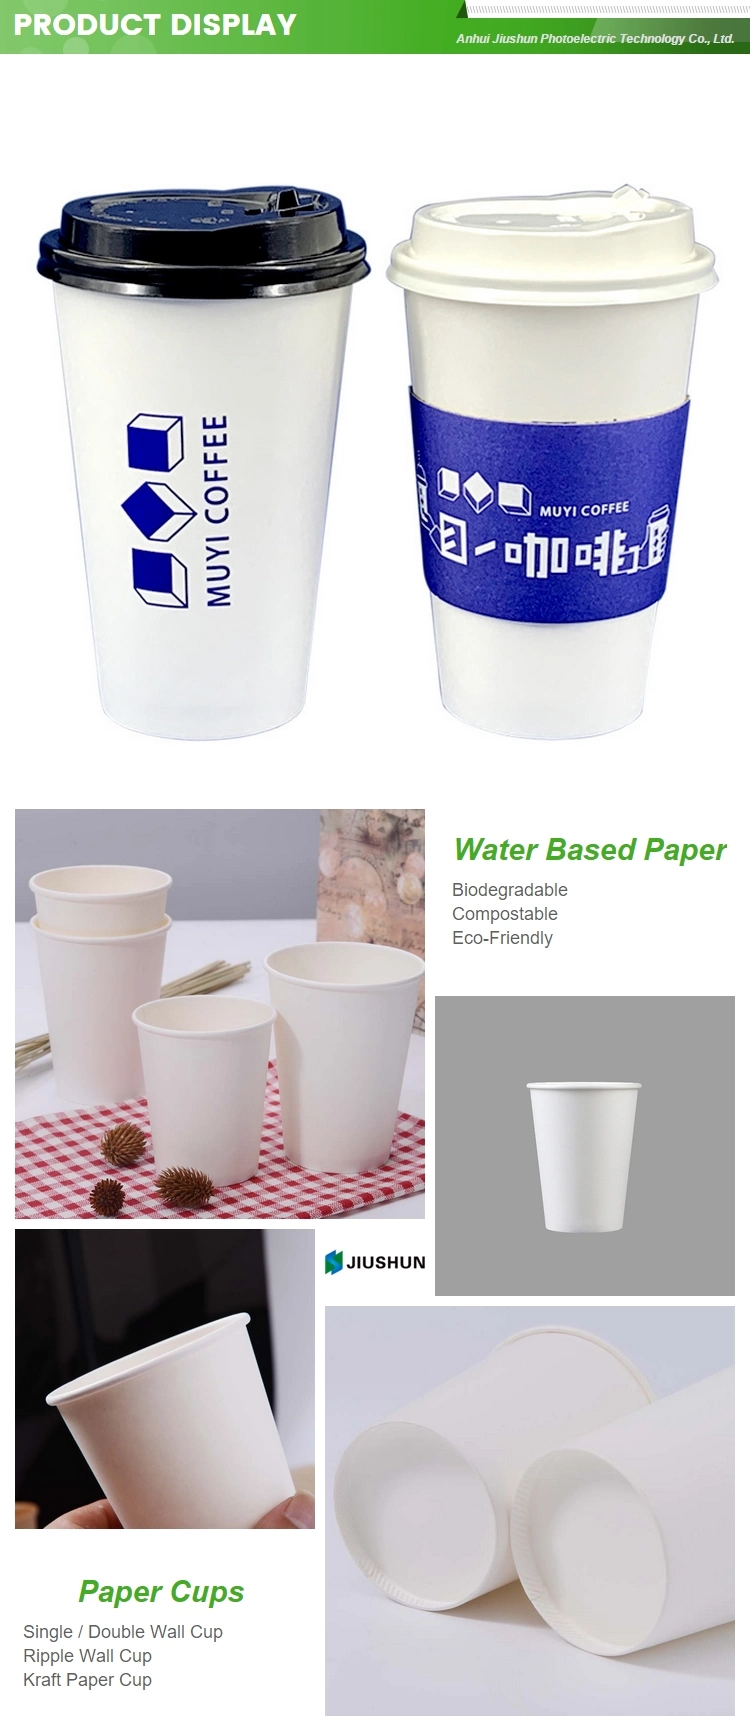 100% Degradable Plastic Free Coating Home Compostable 8oz 10oz 12oz Bamboo Pulp Hot Coffee Paper Cup Taky Away Soup Cups